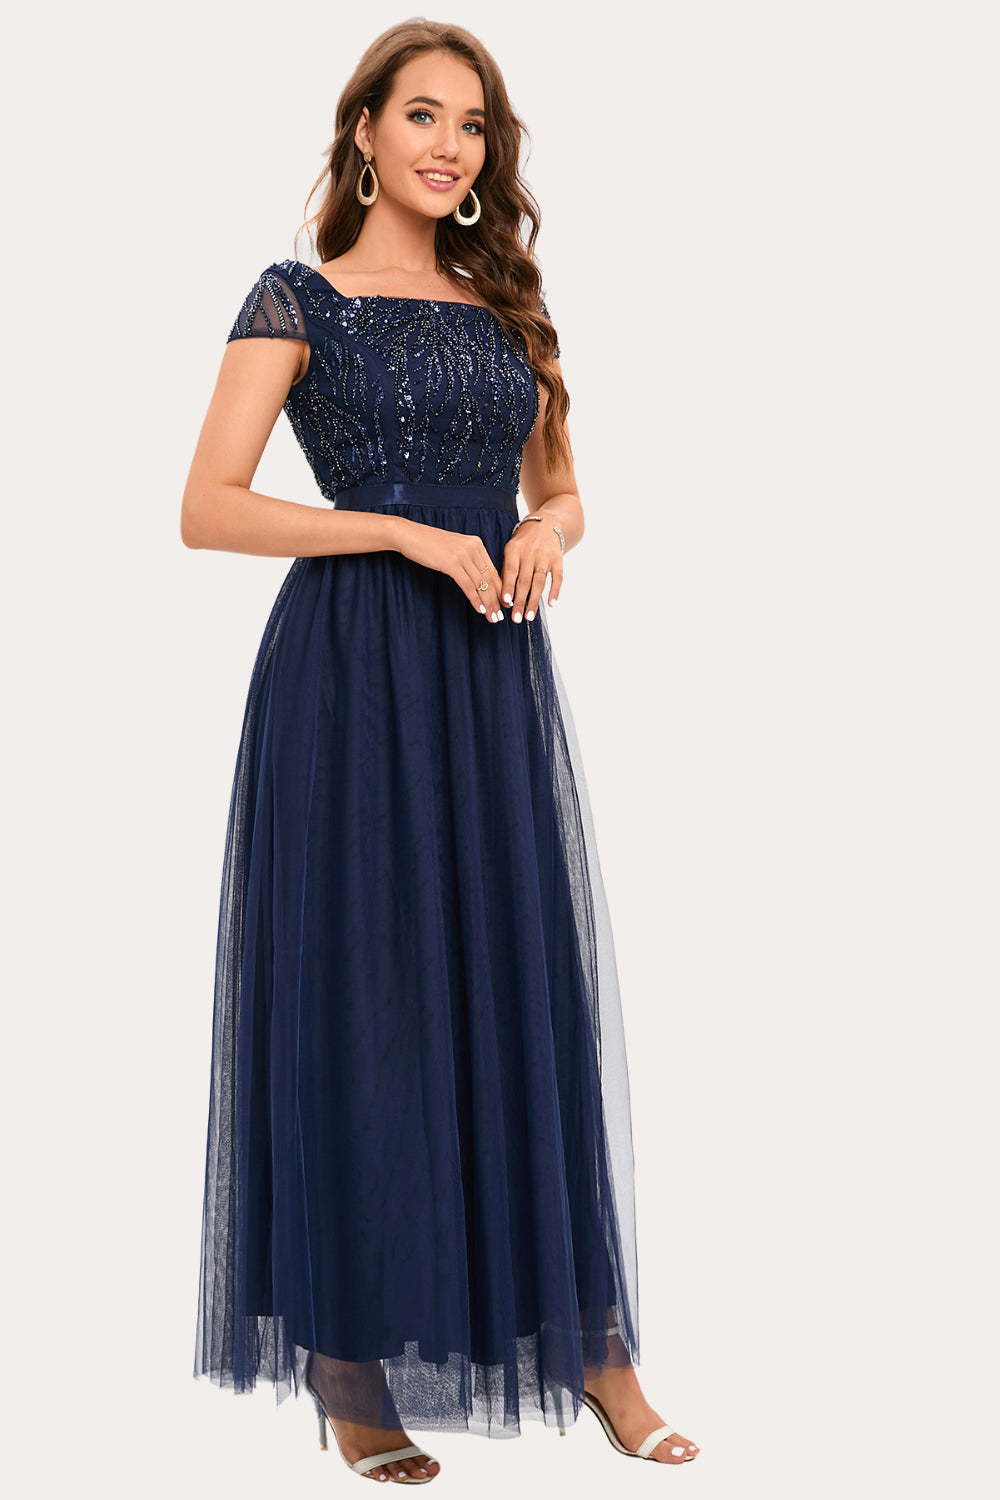 Sparkly Navy Beaded Square Neck Long Tulle Formal Dress